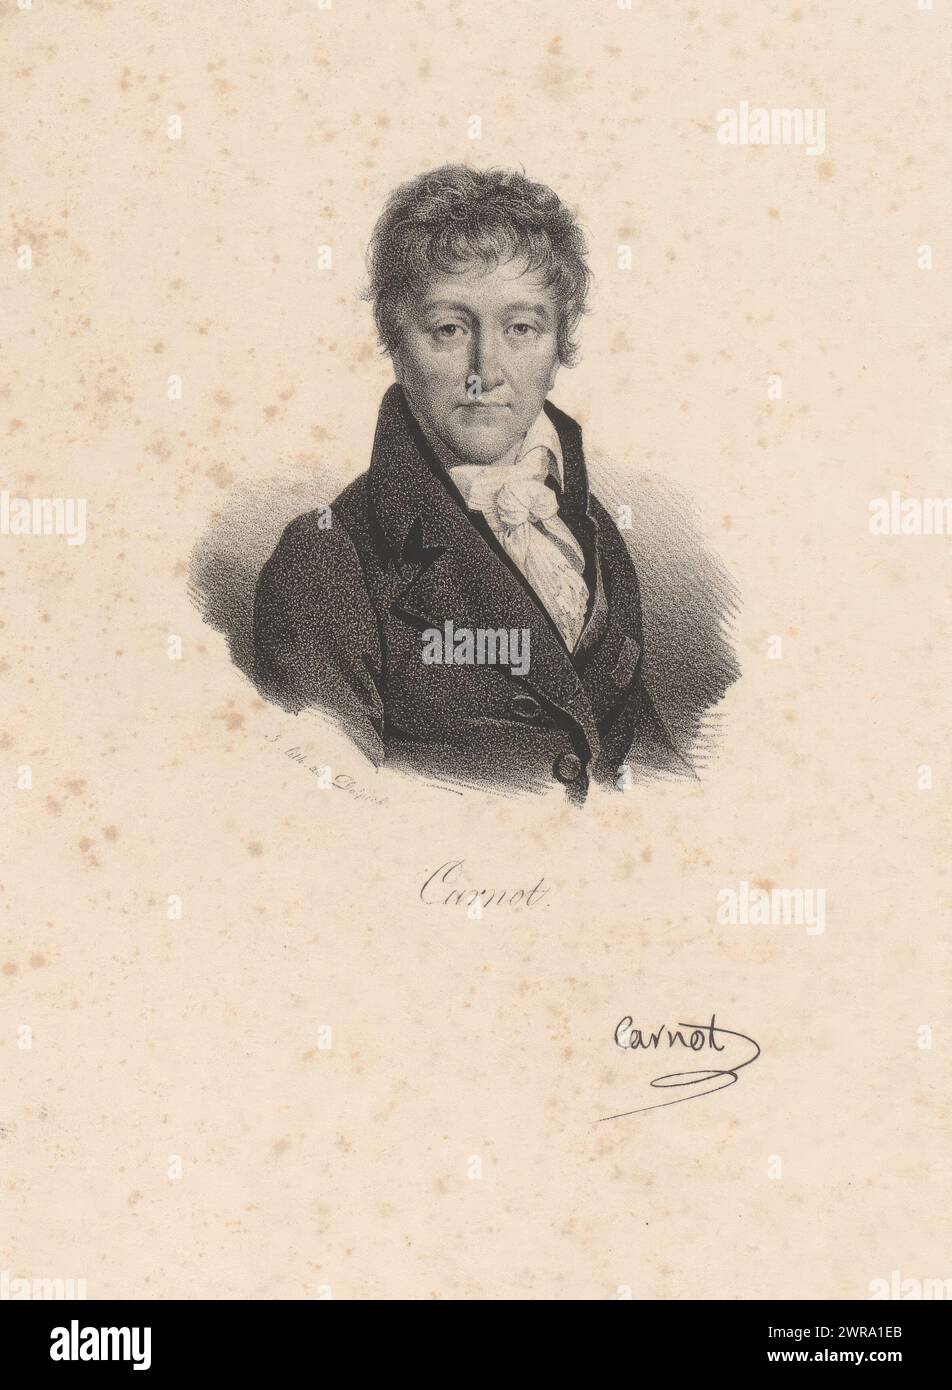 Portrait of Lazare Carnot, Carnot (title on object), print maker: anonymous, printer: veuve Delpech (Naudet), Paris, in or after 1818 - in or before 1842, paper, height 277 mm × width 186 mm, print Stock Photo